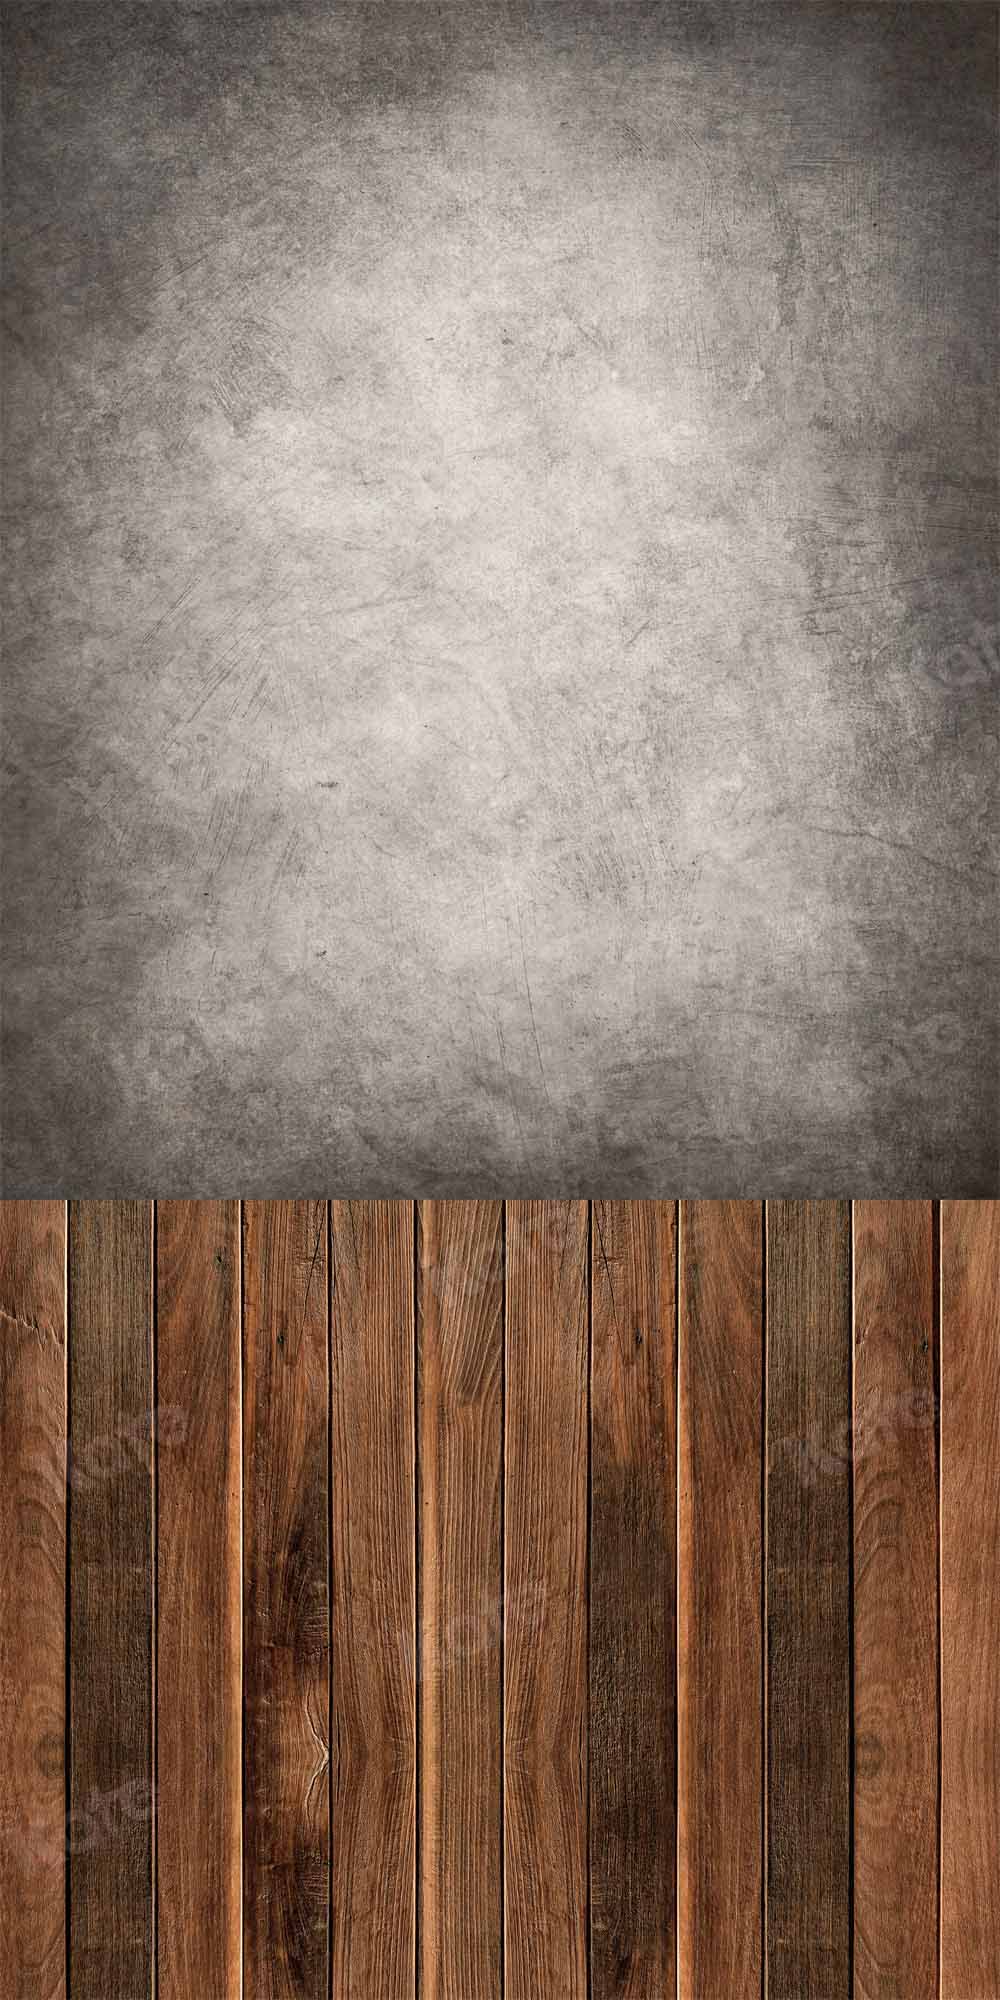 Kate Abstract Wood Board Backdrop Splicing Designed by Chain Photography